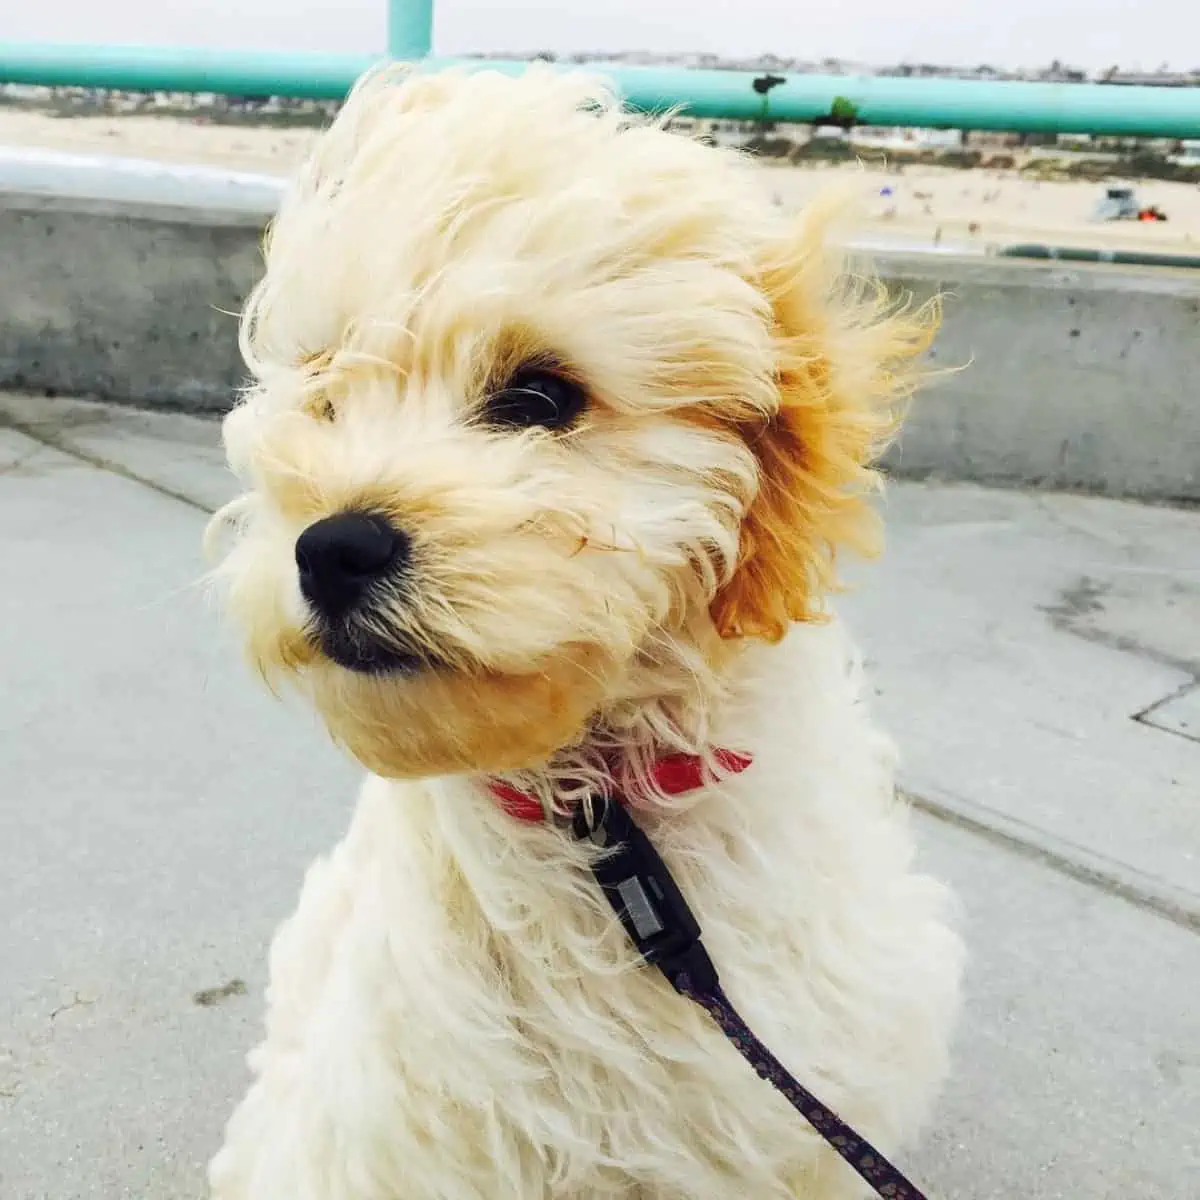 strong wind blows Toy Goldendoodle hair